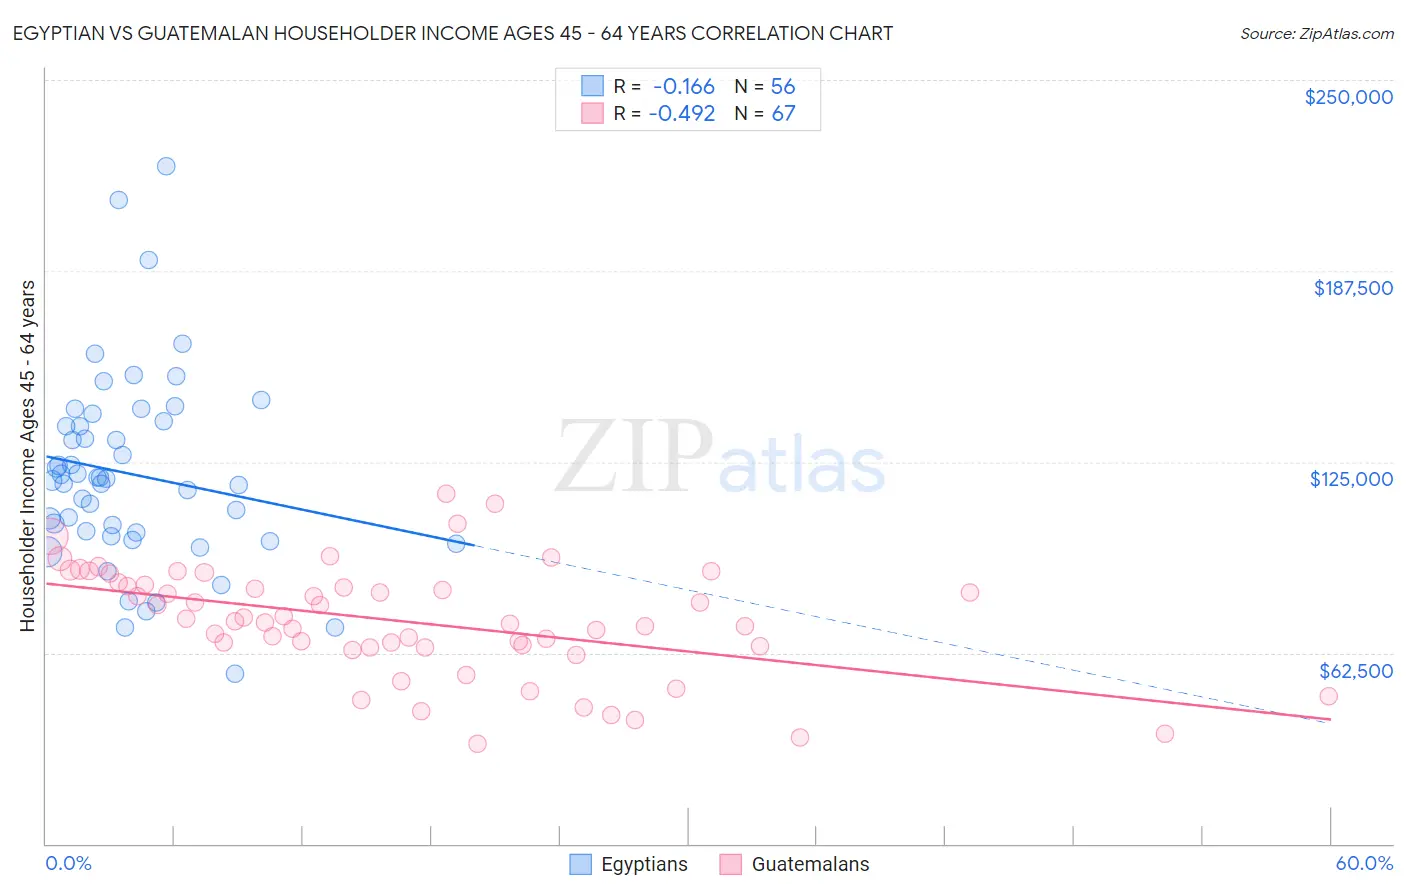 Egyptian vs Guatemalan Householder Income Ages 45 - 64 years